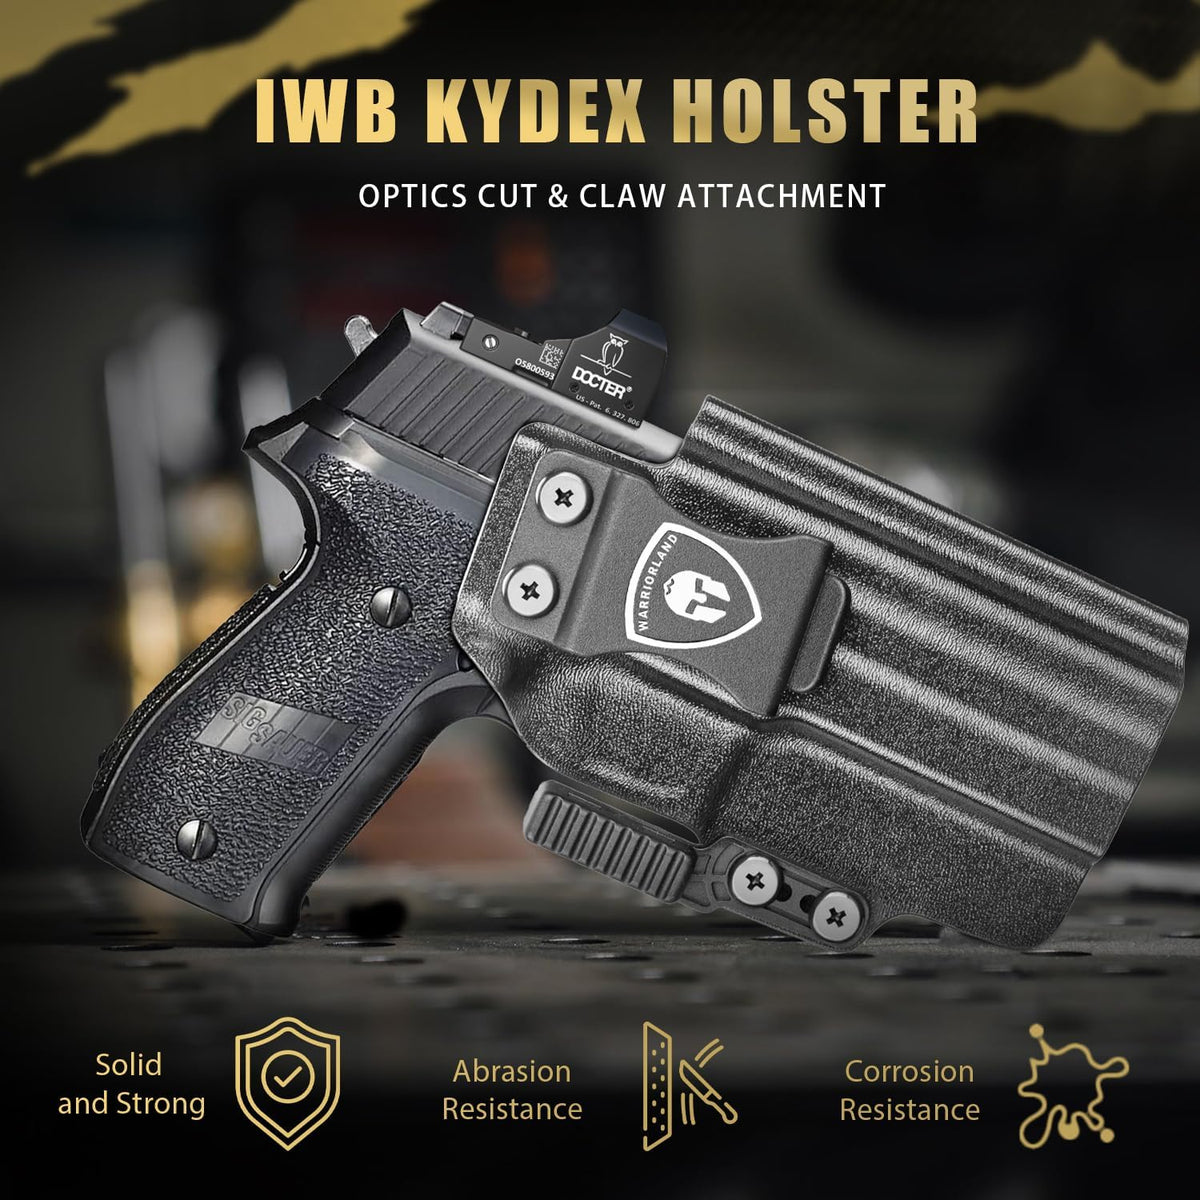 IWB Kydex Holster with Claw Attachment and Optic Cut Fit Sig Sauer P226 Full Size 4.4'' Pistol, Inside Waistband Appendix Carry P266 Holster, Adj. Cant & Retention, Right Hand|WARRIORLAND